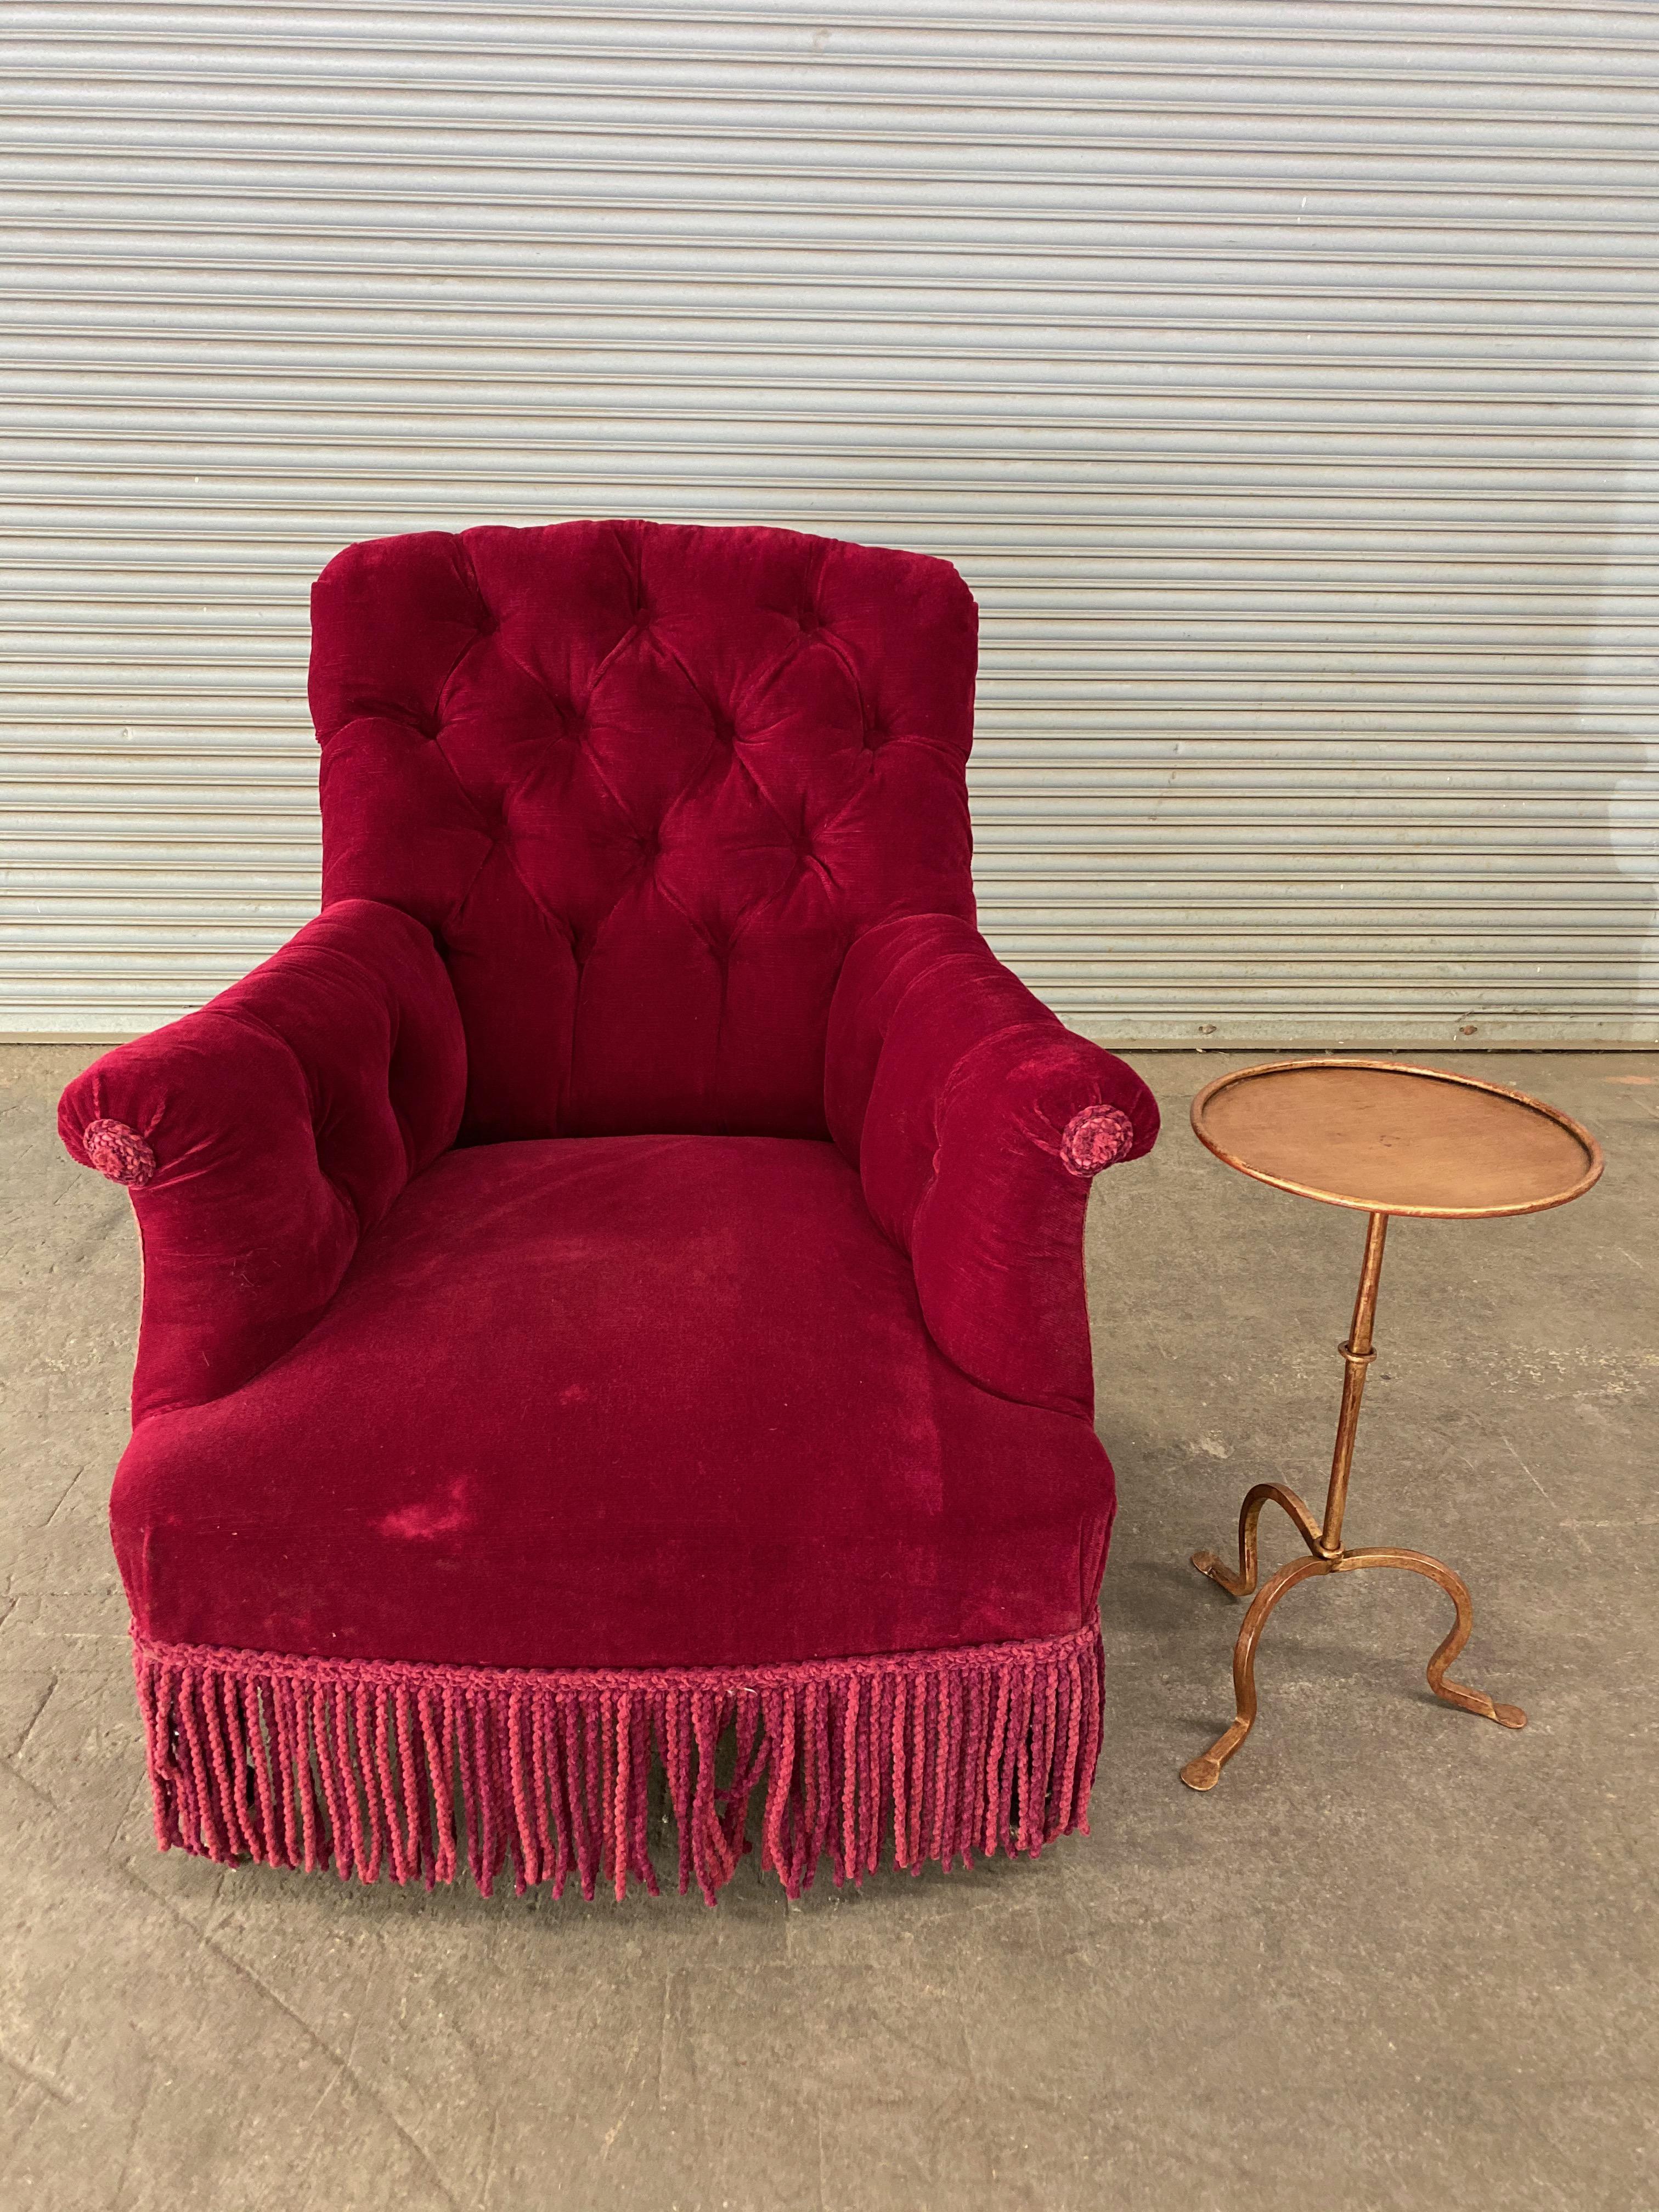 A handsome French 19th tufted armchair upholstered in red velvet with matching bullion fringe. The armchair is in very good vintage condition, and while the upholstery is not new, the fabric is clean and can be used. Sold as is.
 